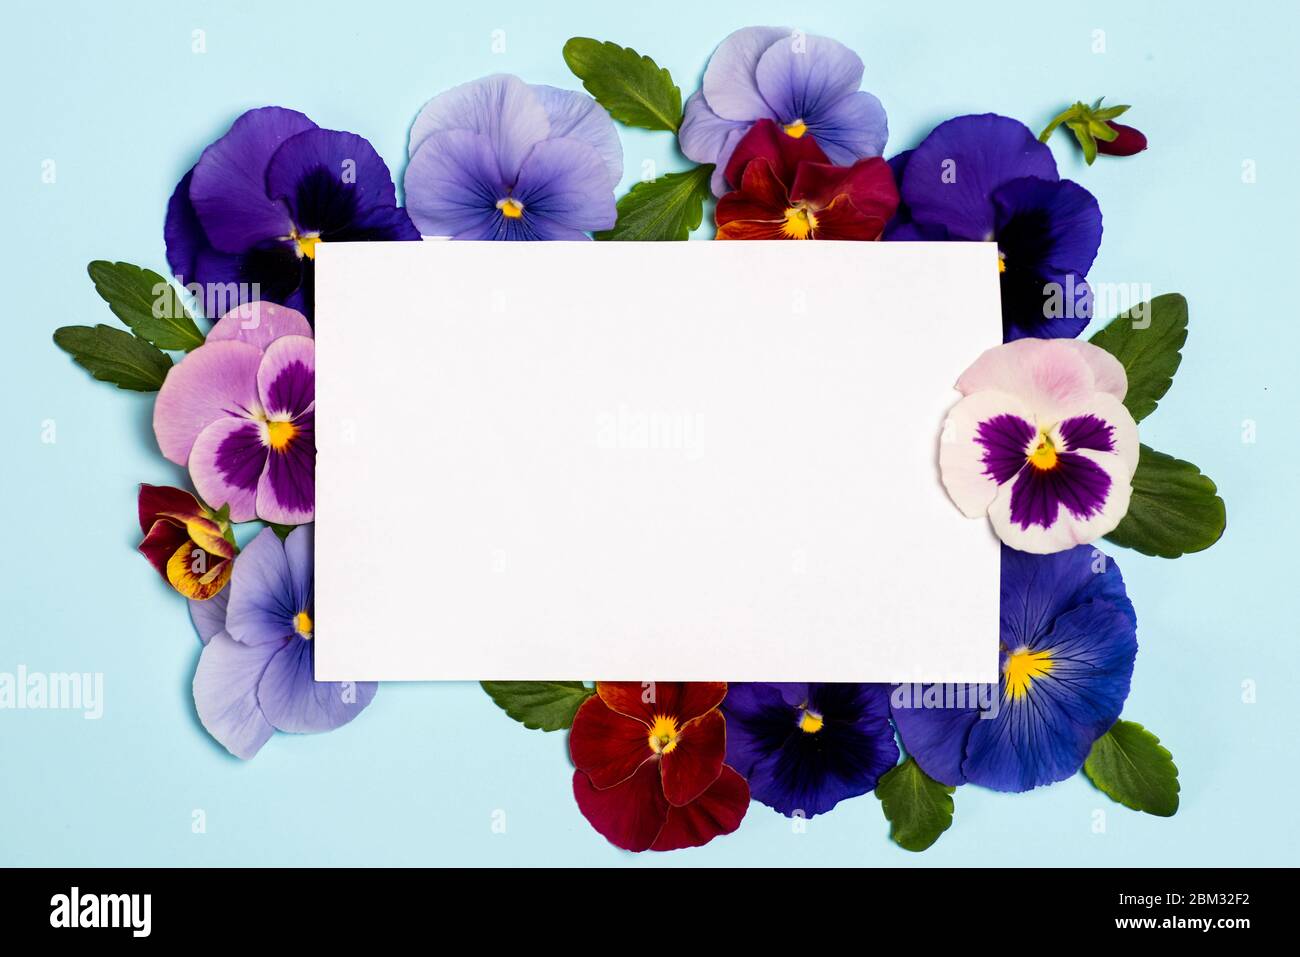 Viola plant violet flower in blossom arrangement with copy space Stock Photo